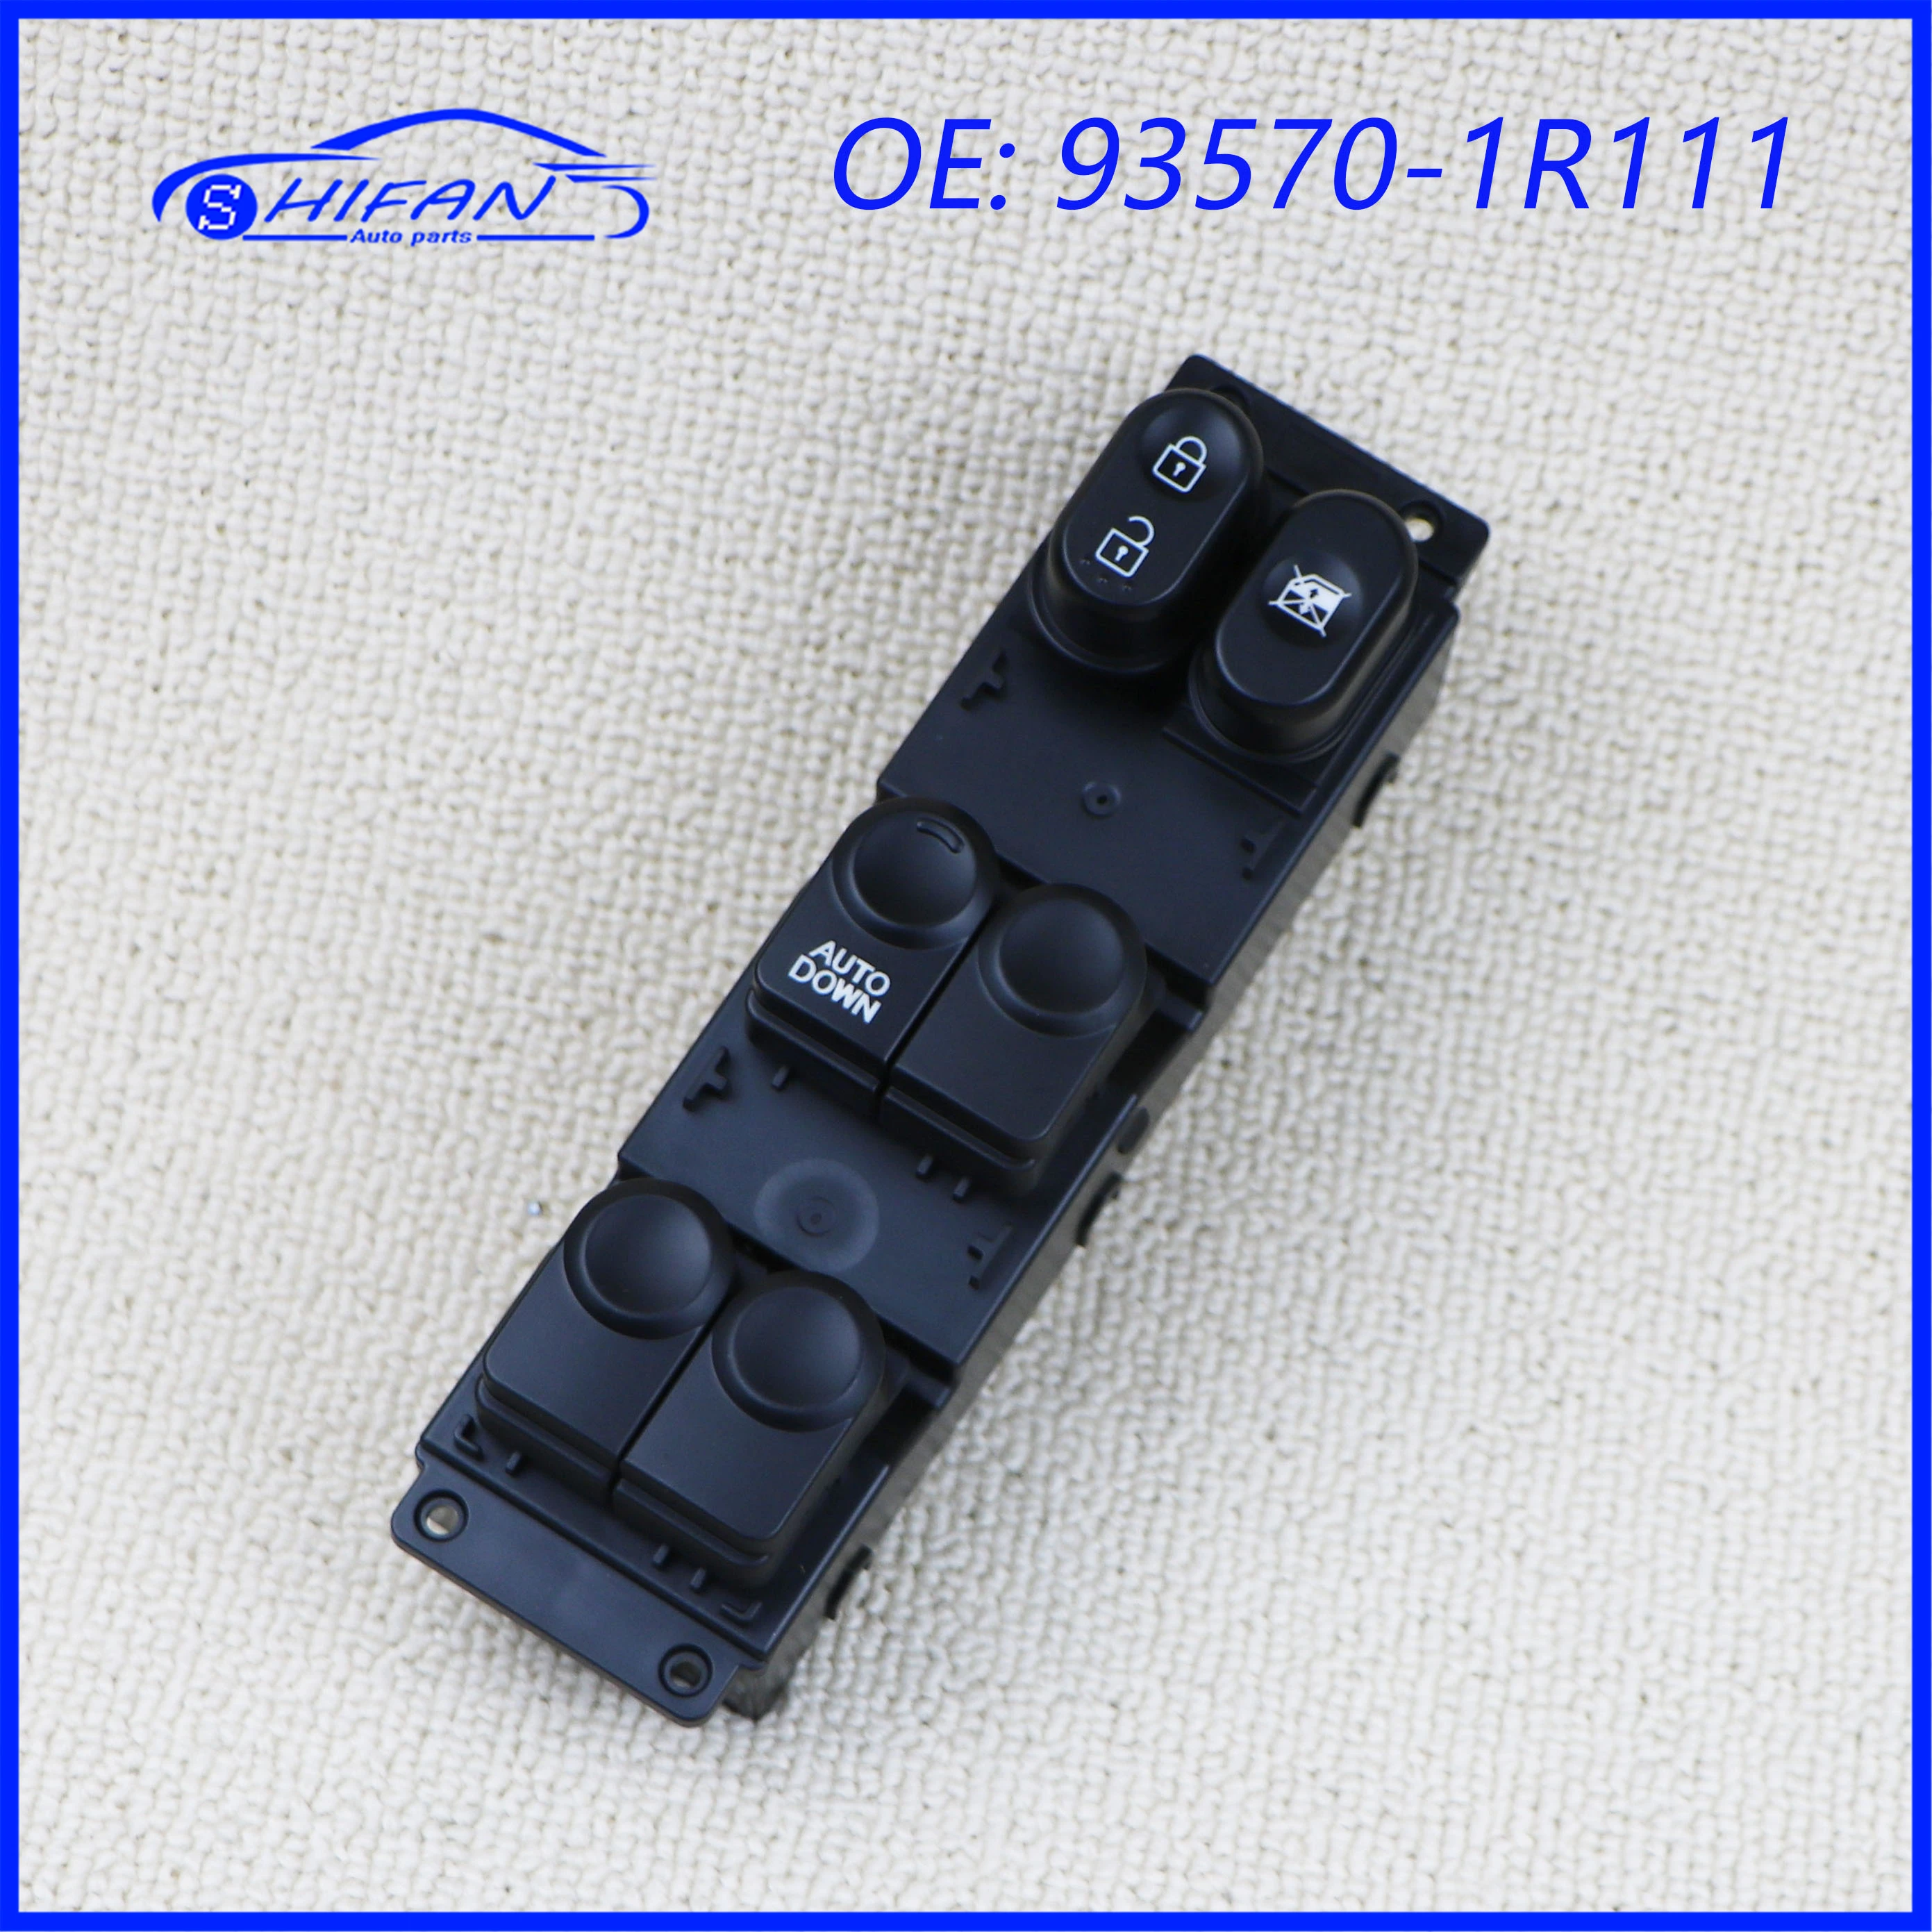 93570-1R111 Car Power Window Control Switch Electric Switch For Hyundai Accent 2010-2017 Car Accessories 935701R111 abs carbon fibre for mazda 3 axela 2017 2018 accessories car door window glass lift control switch panel cover trim car styling